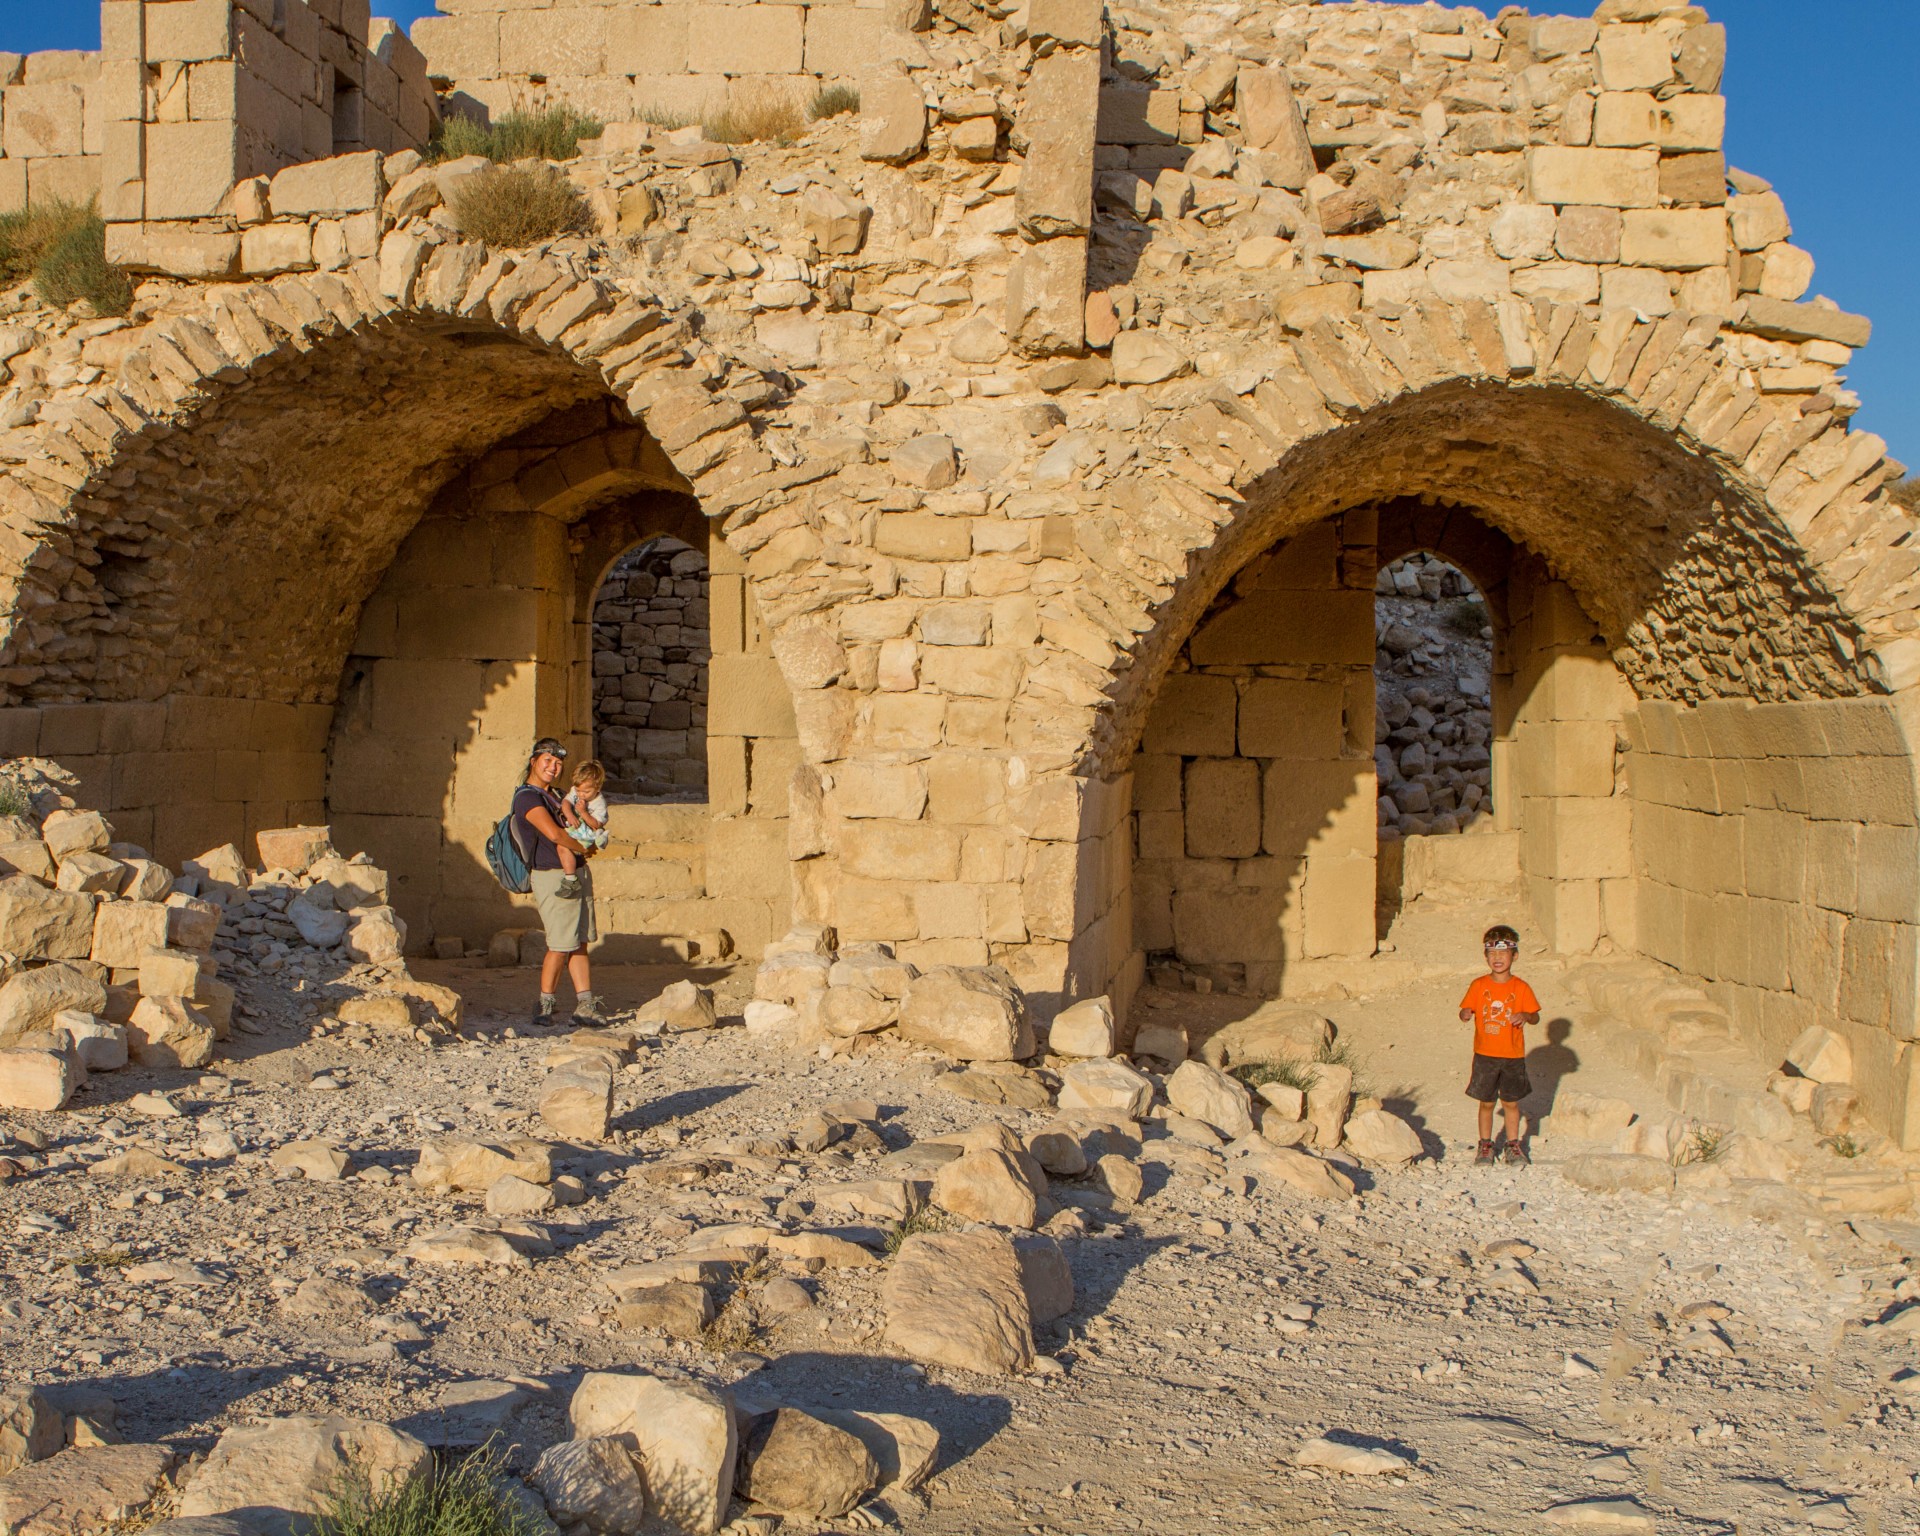 Young boy and a Mother and toddler pose in arches in a desert castle